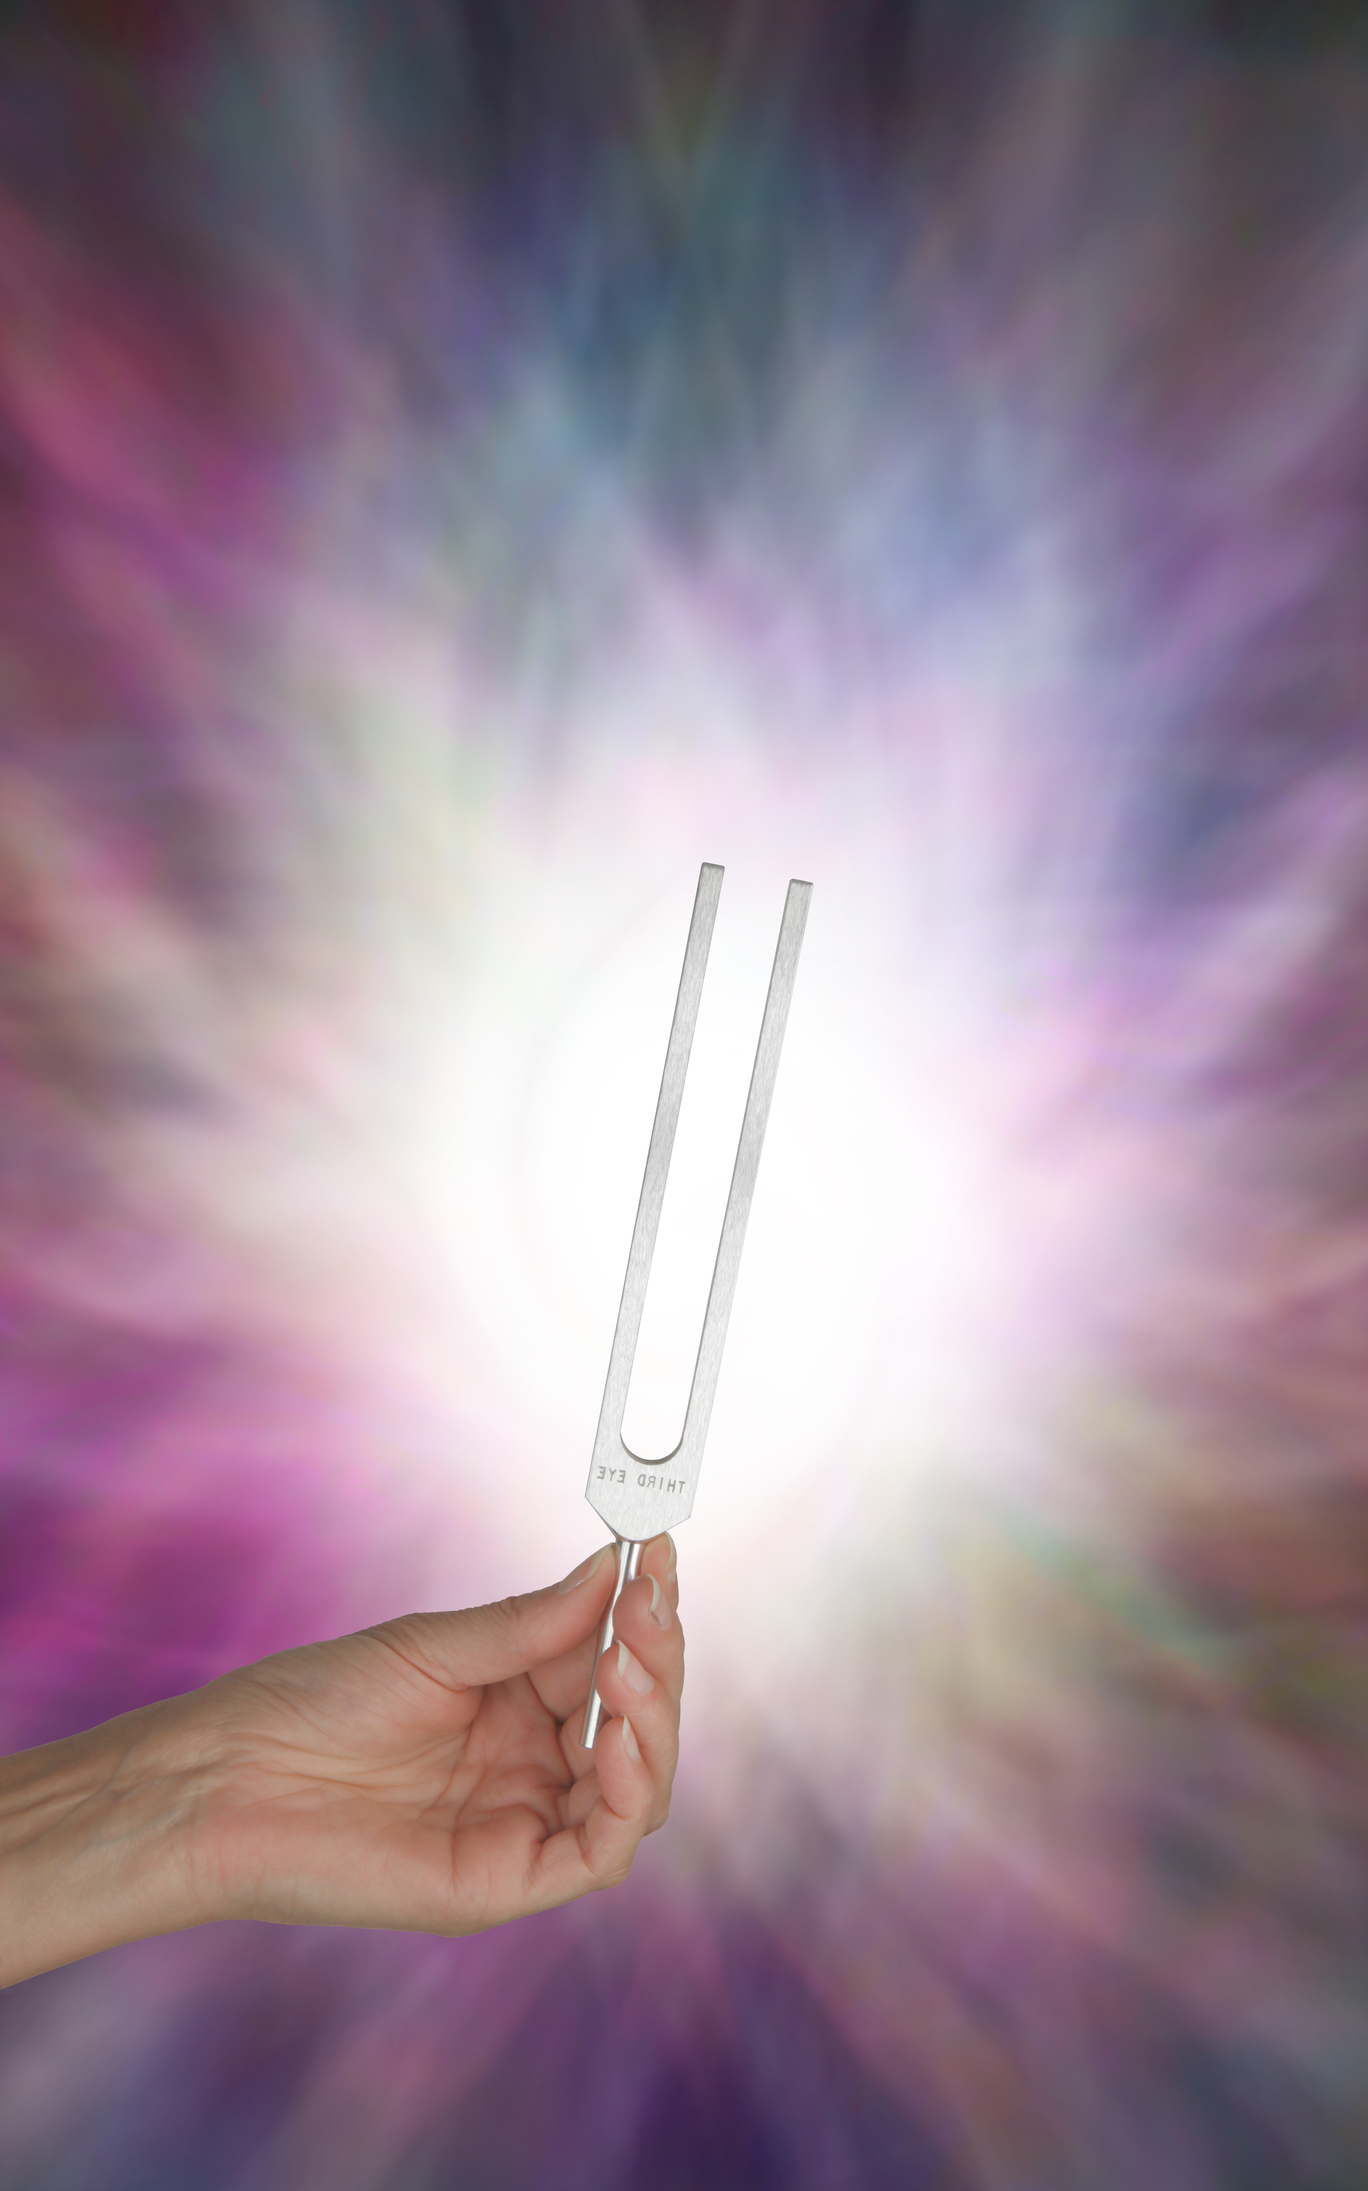 tuning-fork-in-resonating-energy-field-48827407